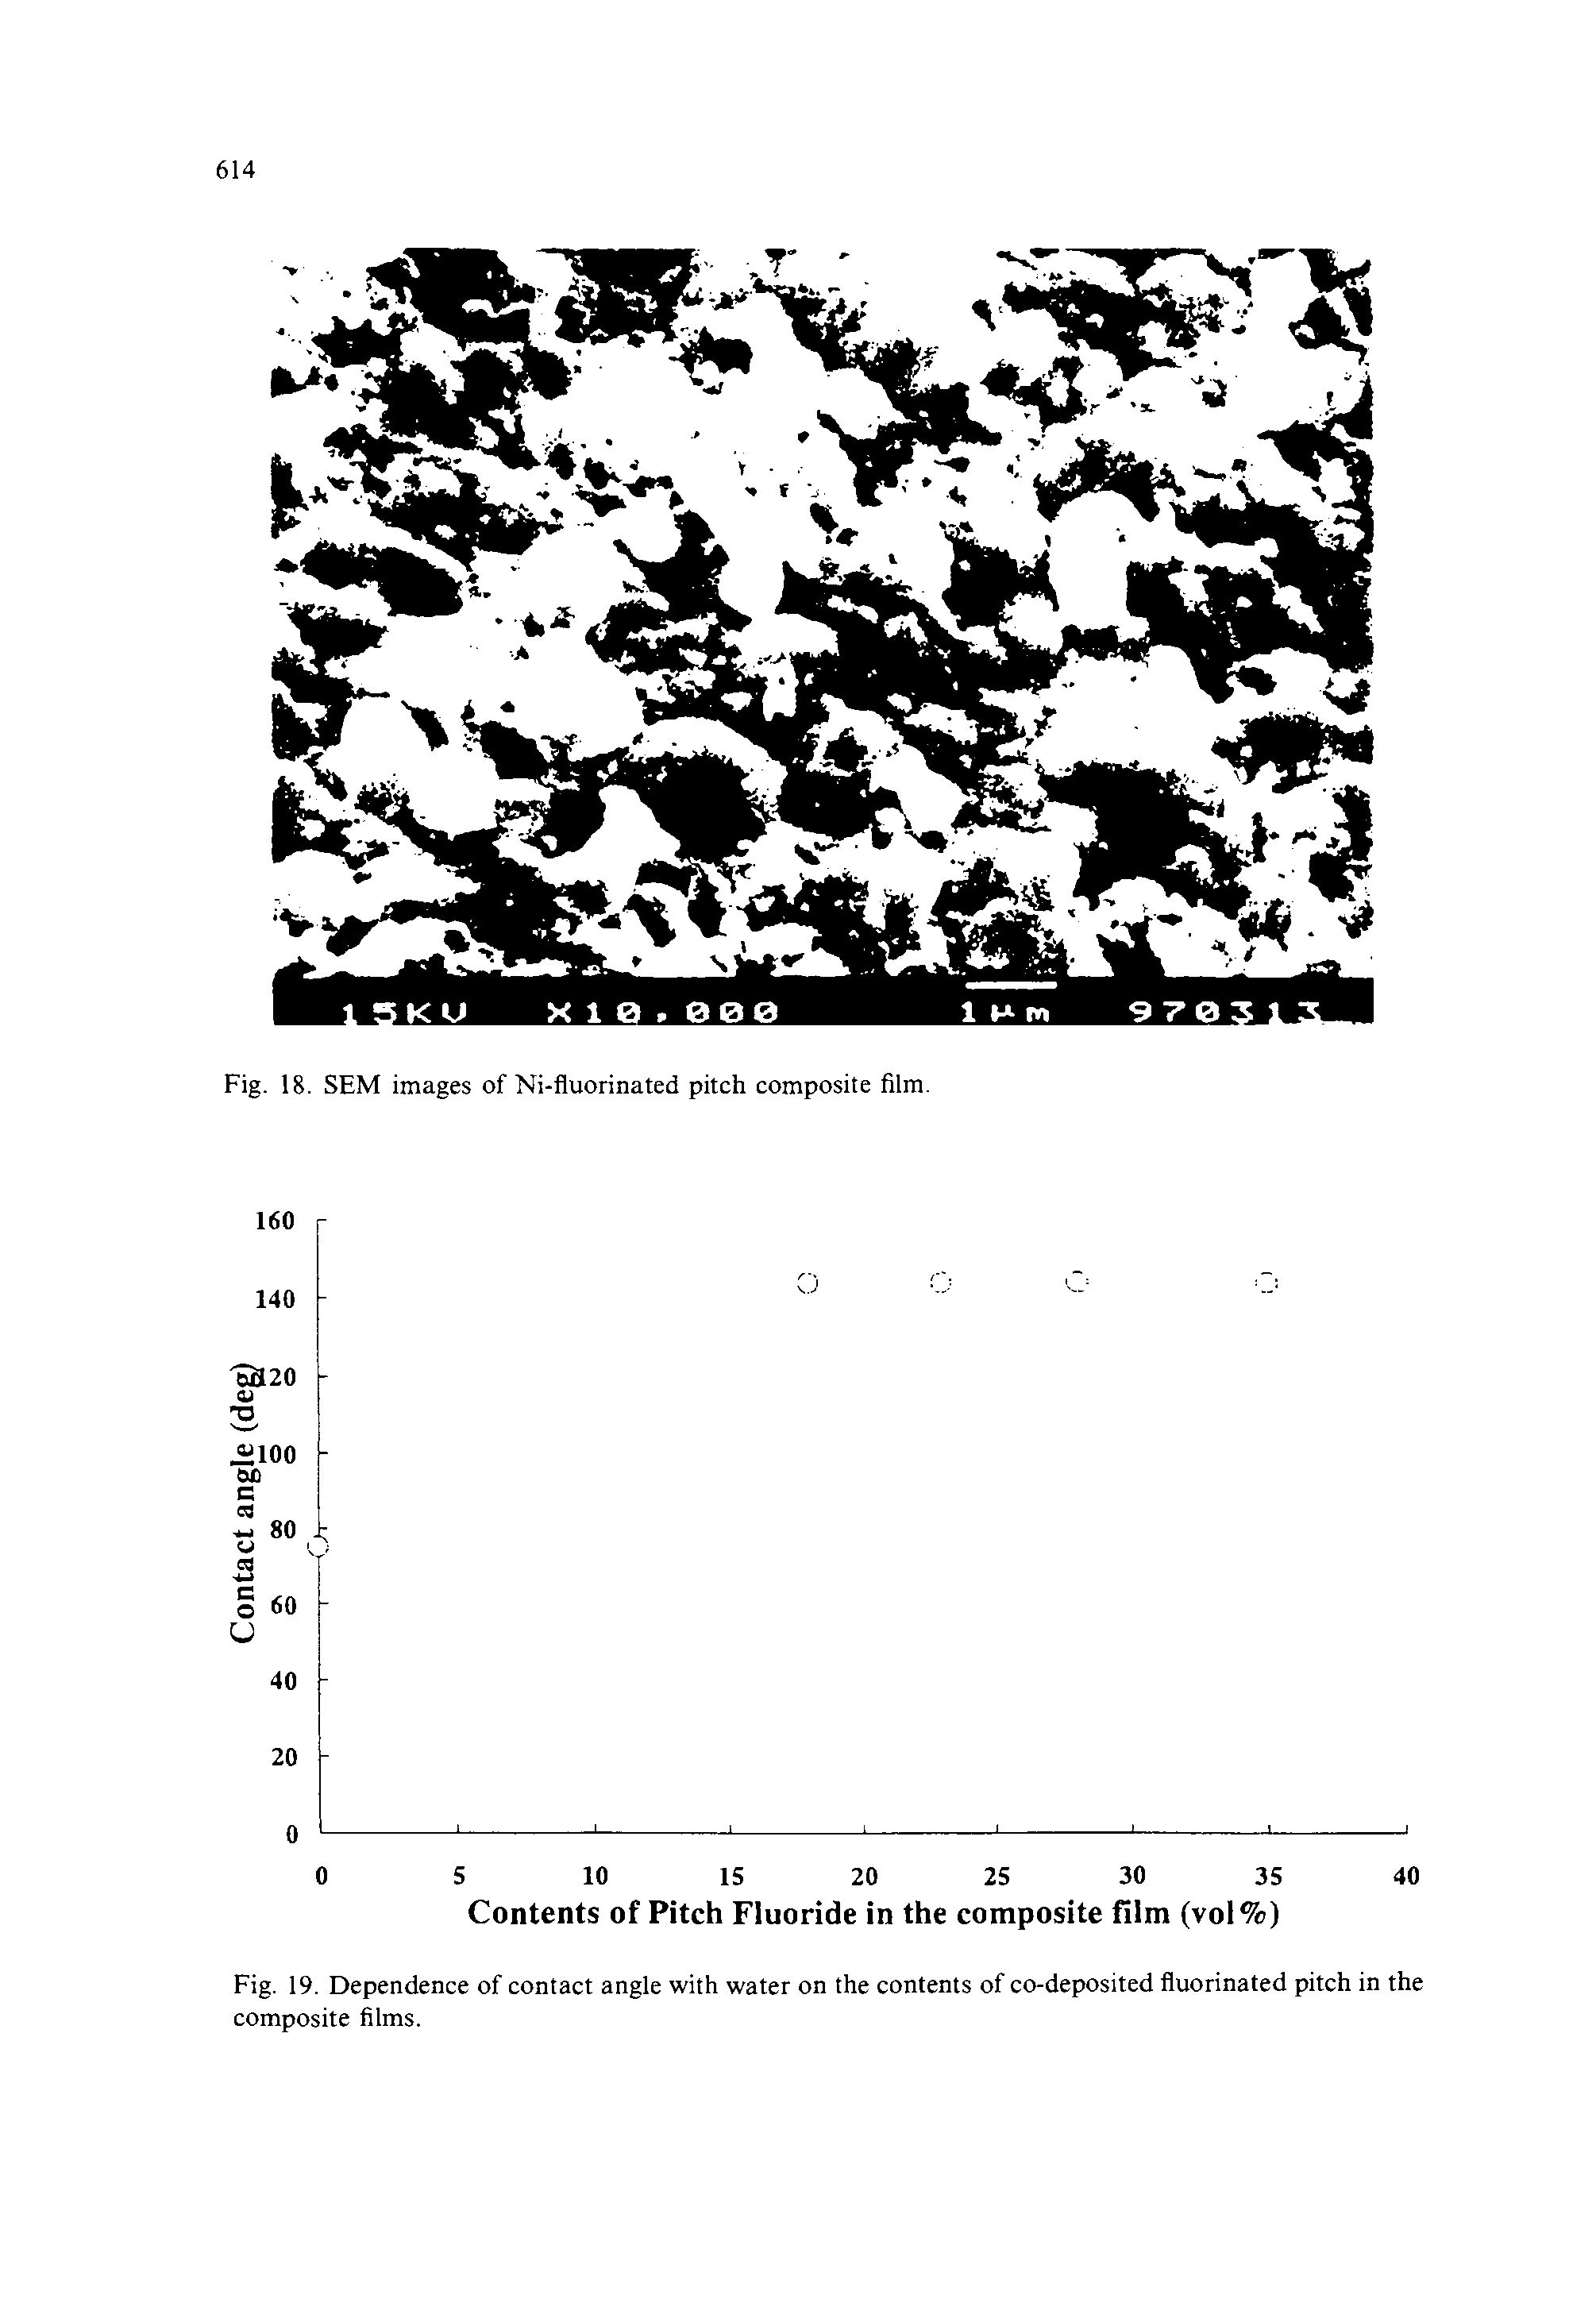 Fig. 19. Dependence of contact angle with water on the contents of co-deposited fluorinated pitch in the composite films.